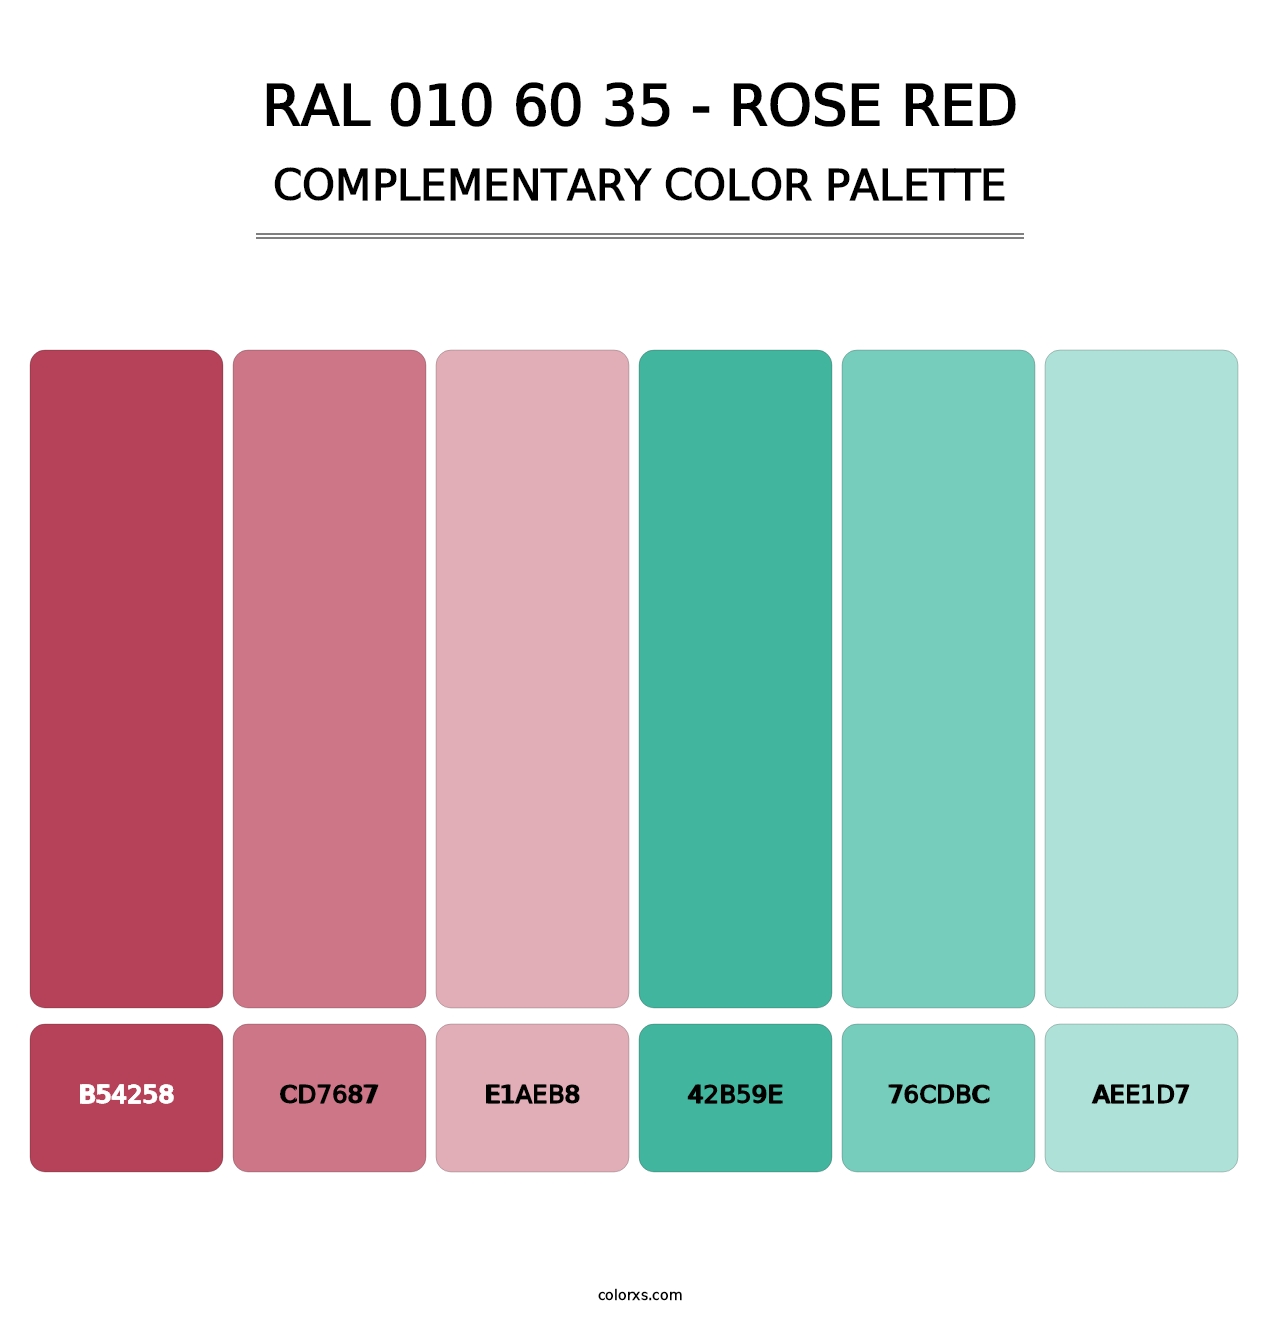 RAL 010 60 35 - Rose Red - Complementary Color Palette